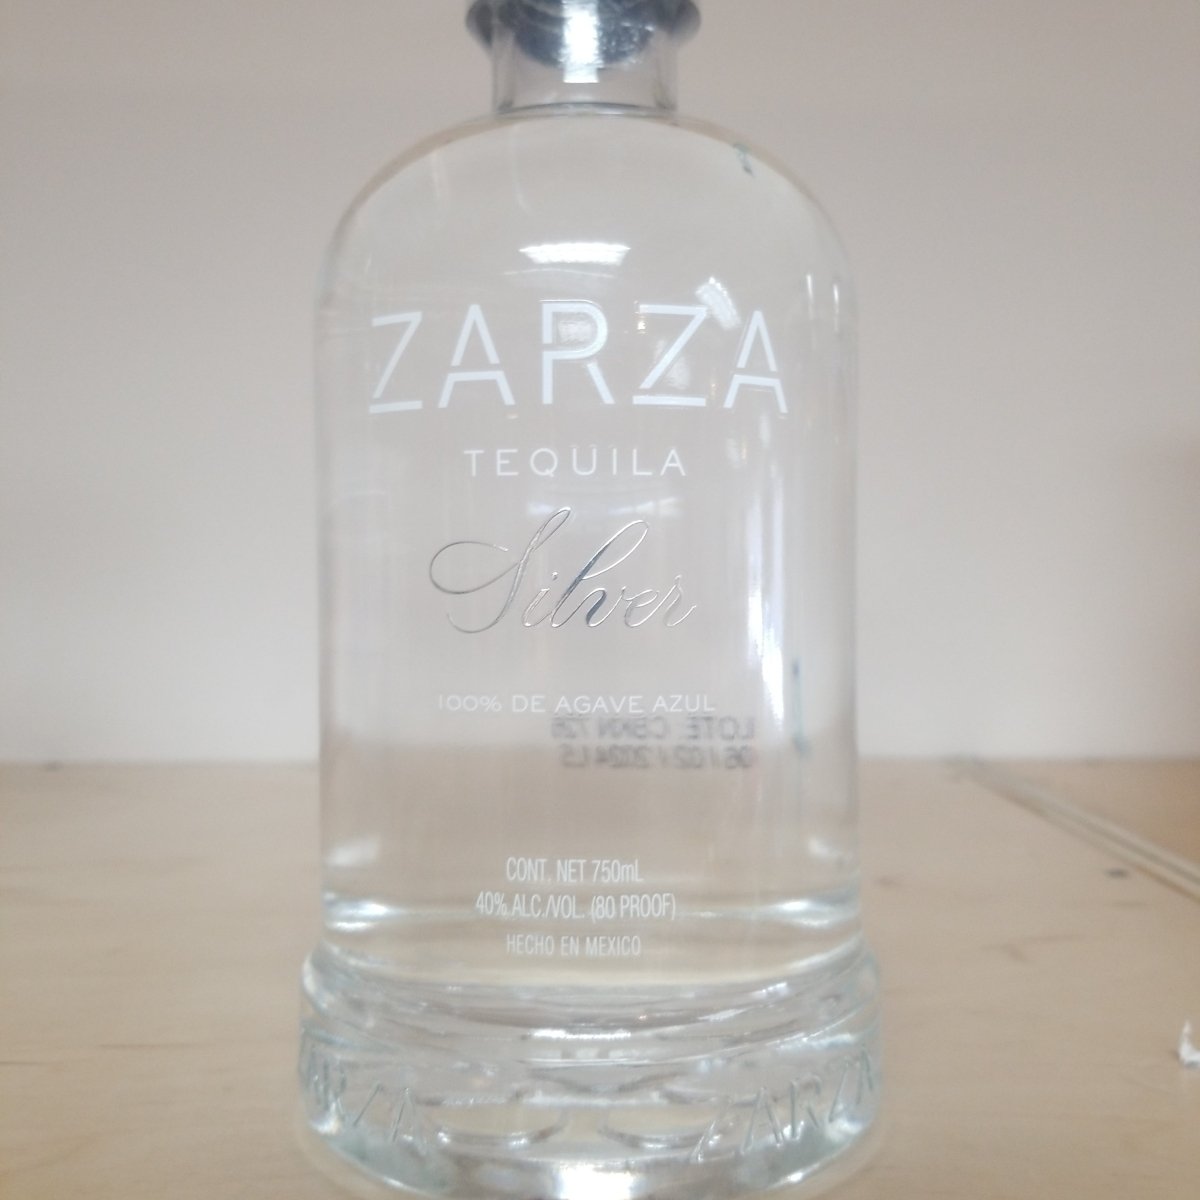 Zarza Blanco Tequila 750ml (Kosher for Passover) - Sip & Say